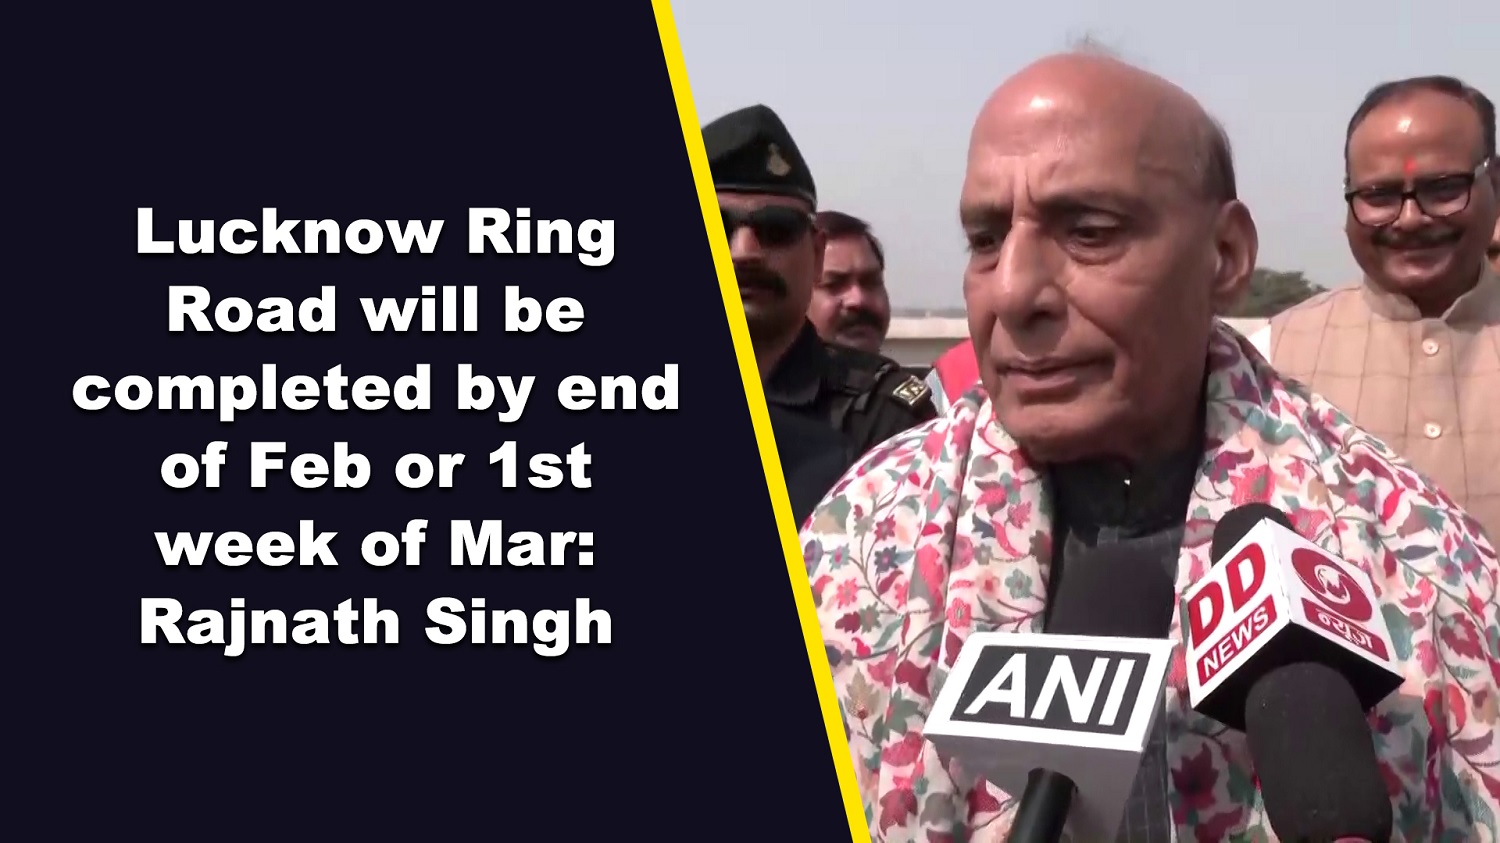 Lucknow Ring Road will be completed by end of Feb or 1st week of Mar: Rajnath Singh